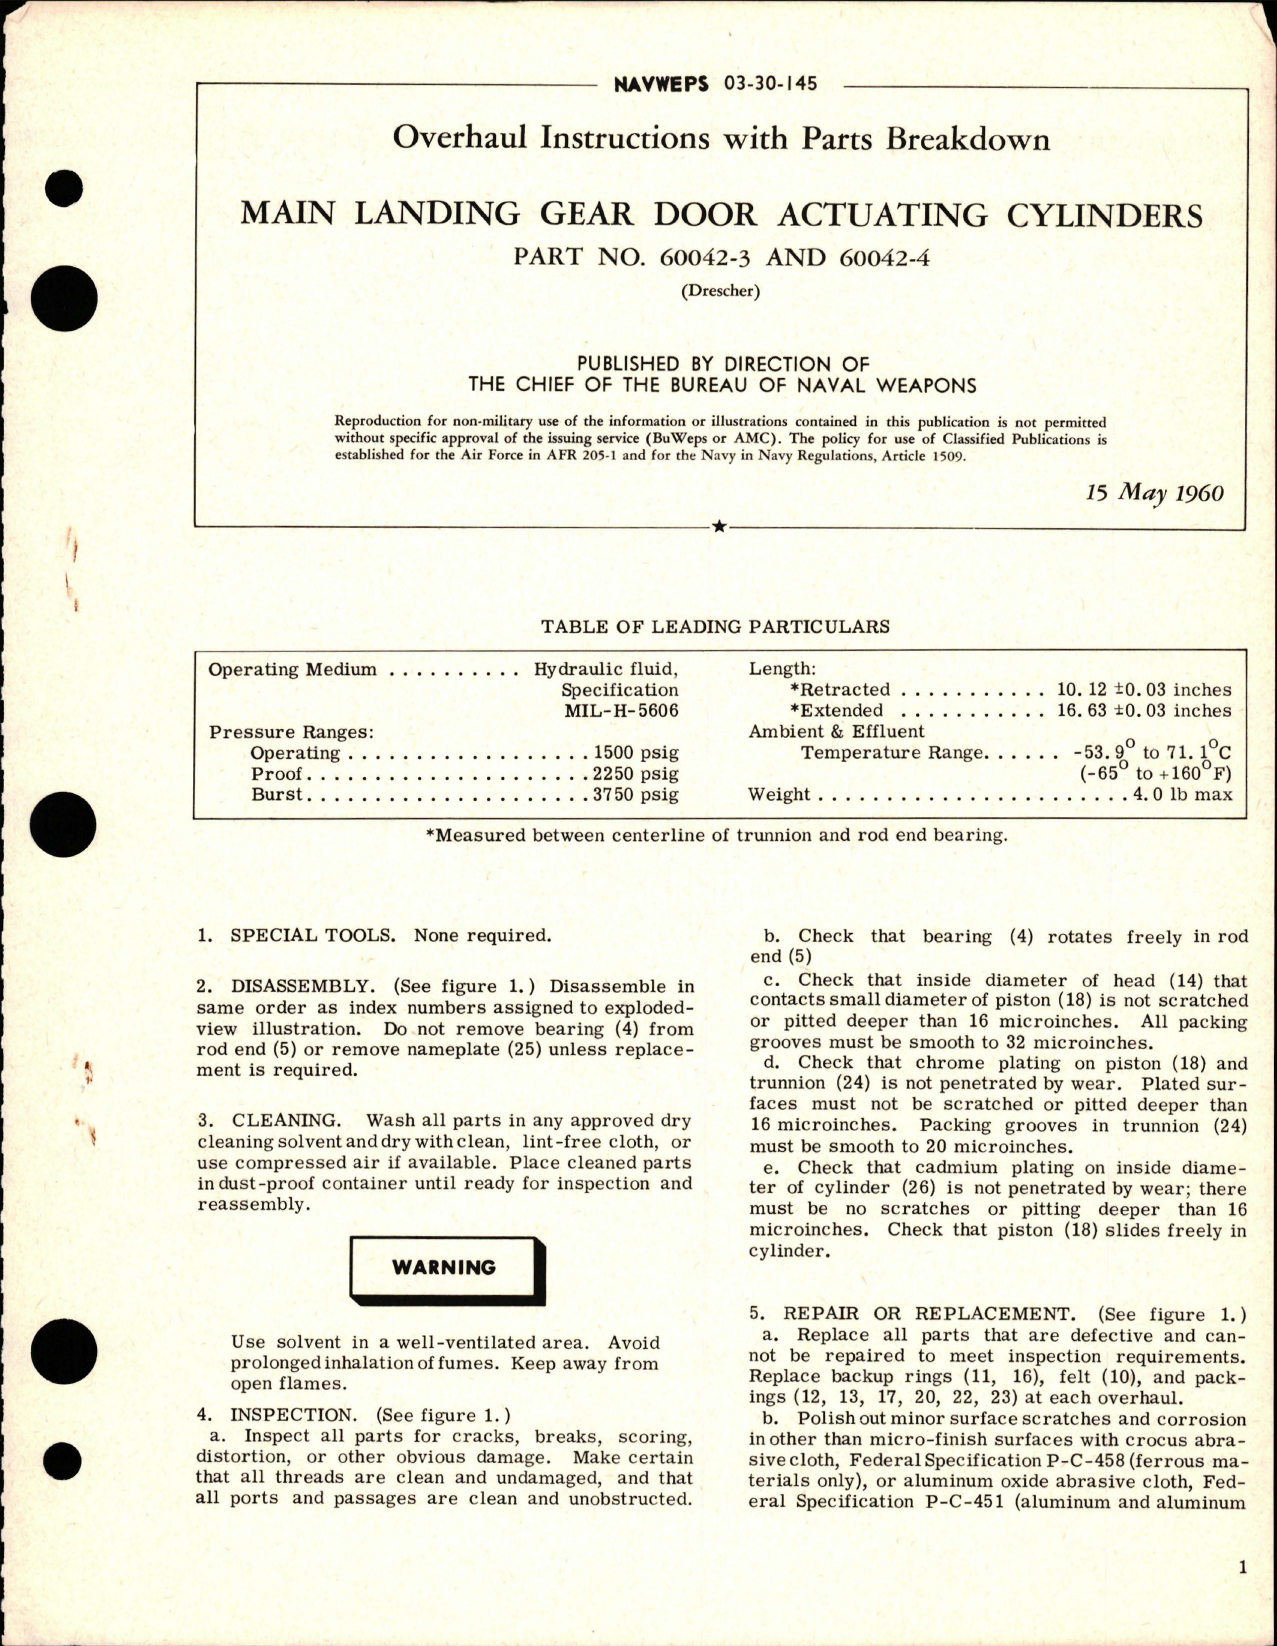 Sample page 1 from AirCorps Library document: Overhaul Instructions with Parts Breakdown for Main Landing Gear Door Actuating Cylinders - Parts 60042-3 and 60042-4